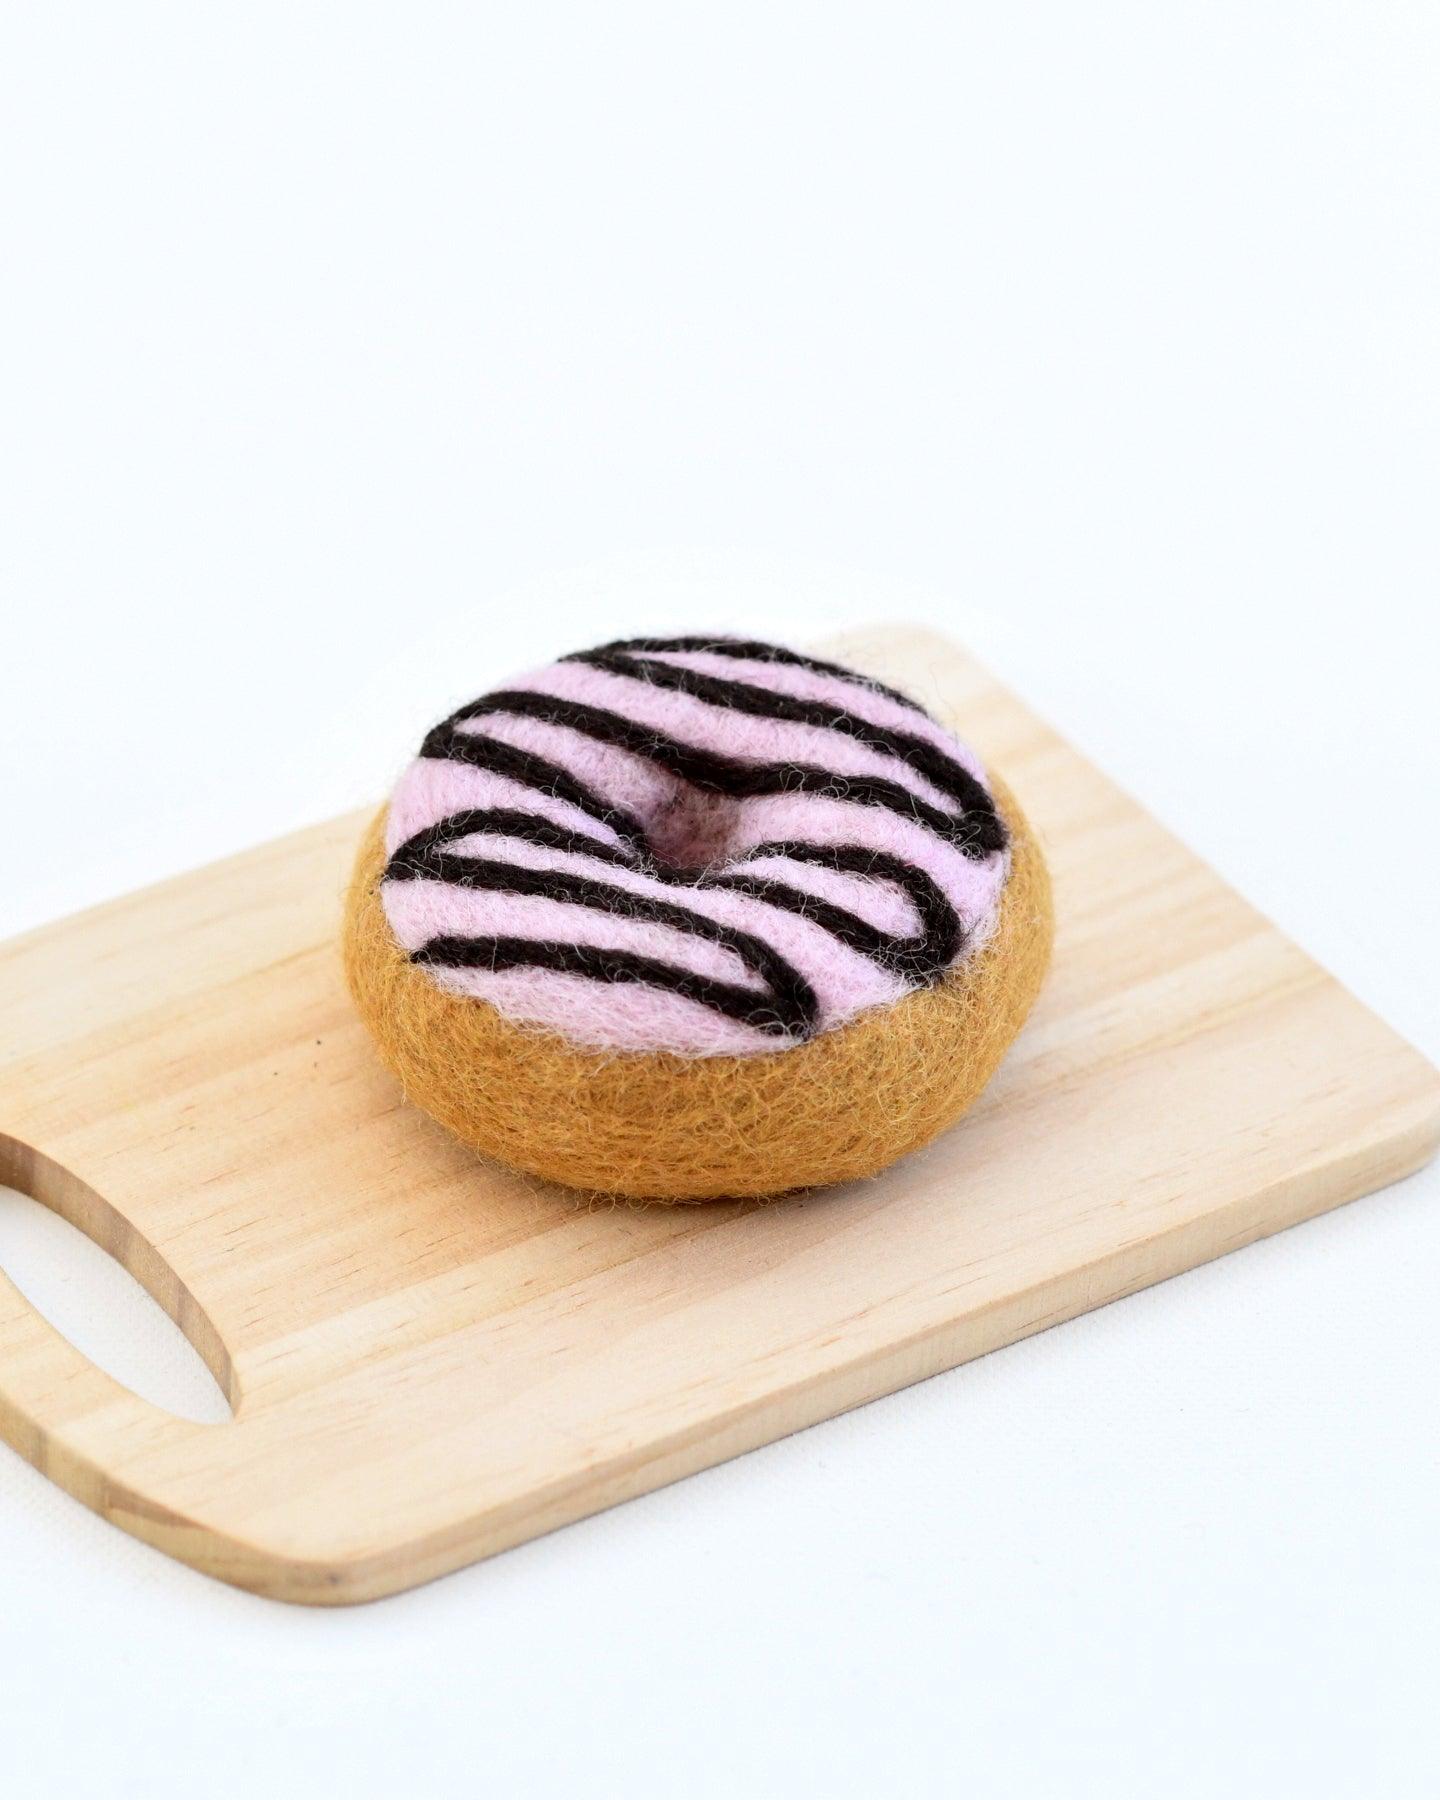 Felt Doughnut (Donut) with Pink Vanilla Frosting and Chocolate Drizzle - Tara Treasures